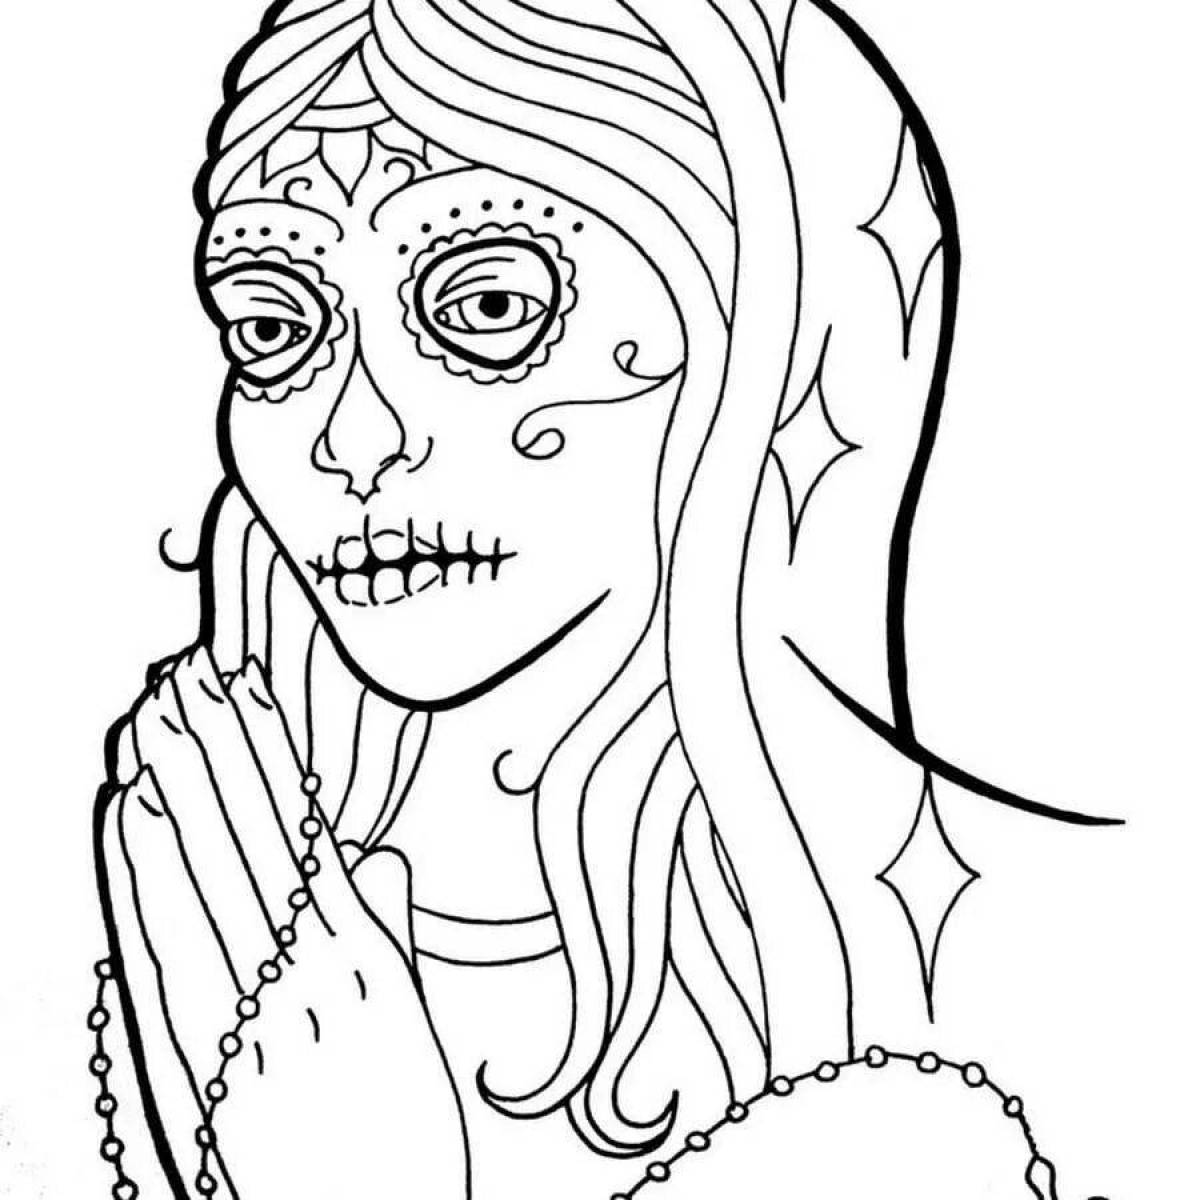 Nasty girls coloring book